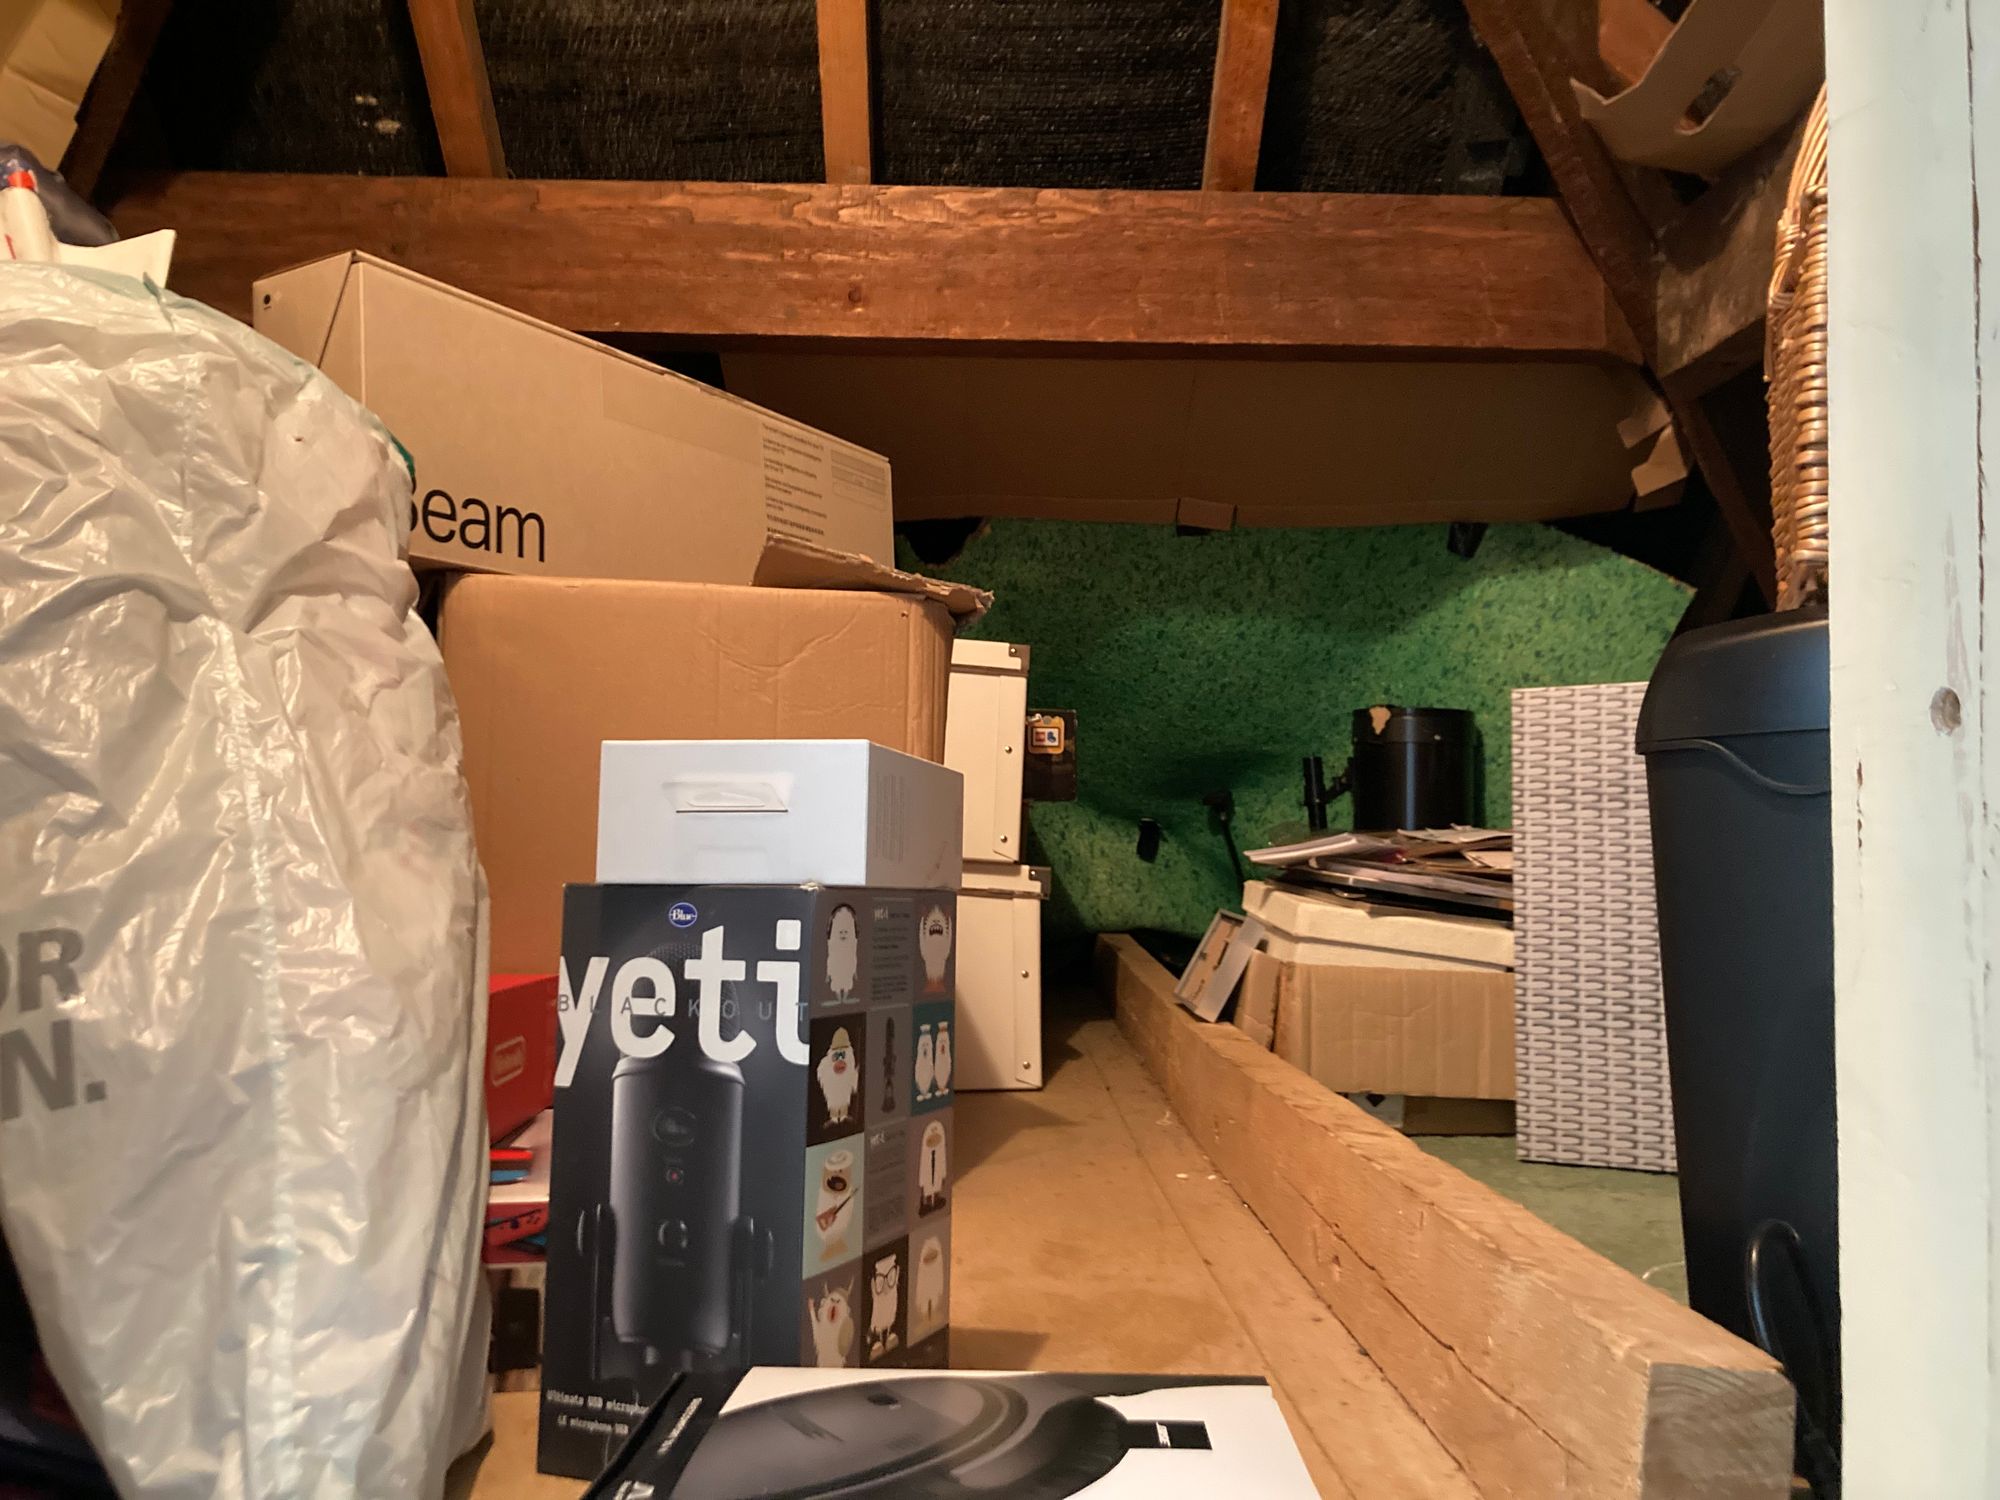 A loft or crawl space full of boxes